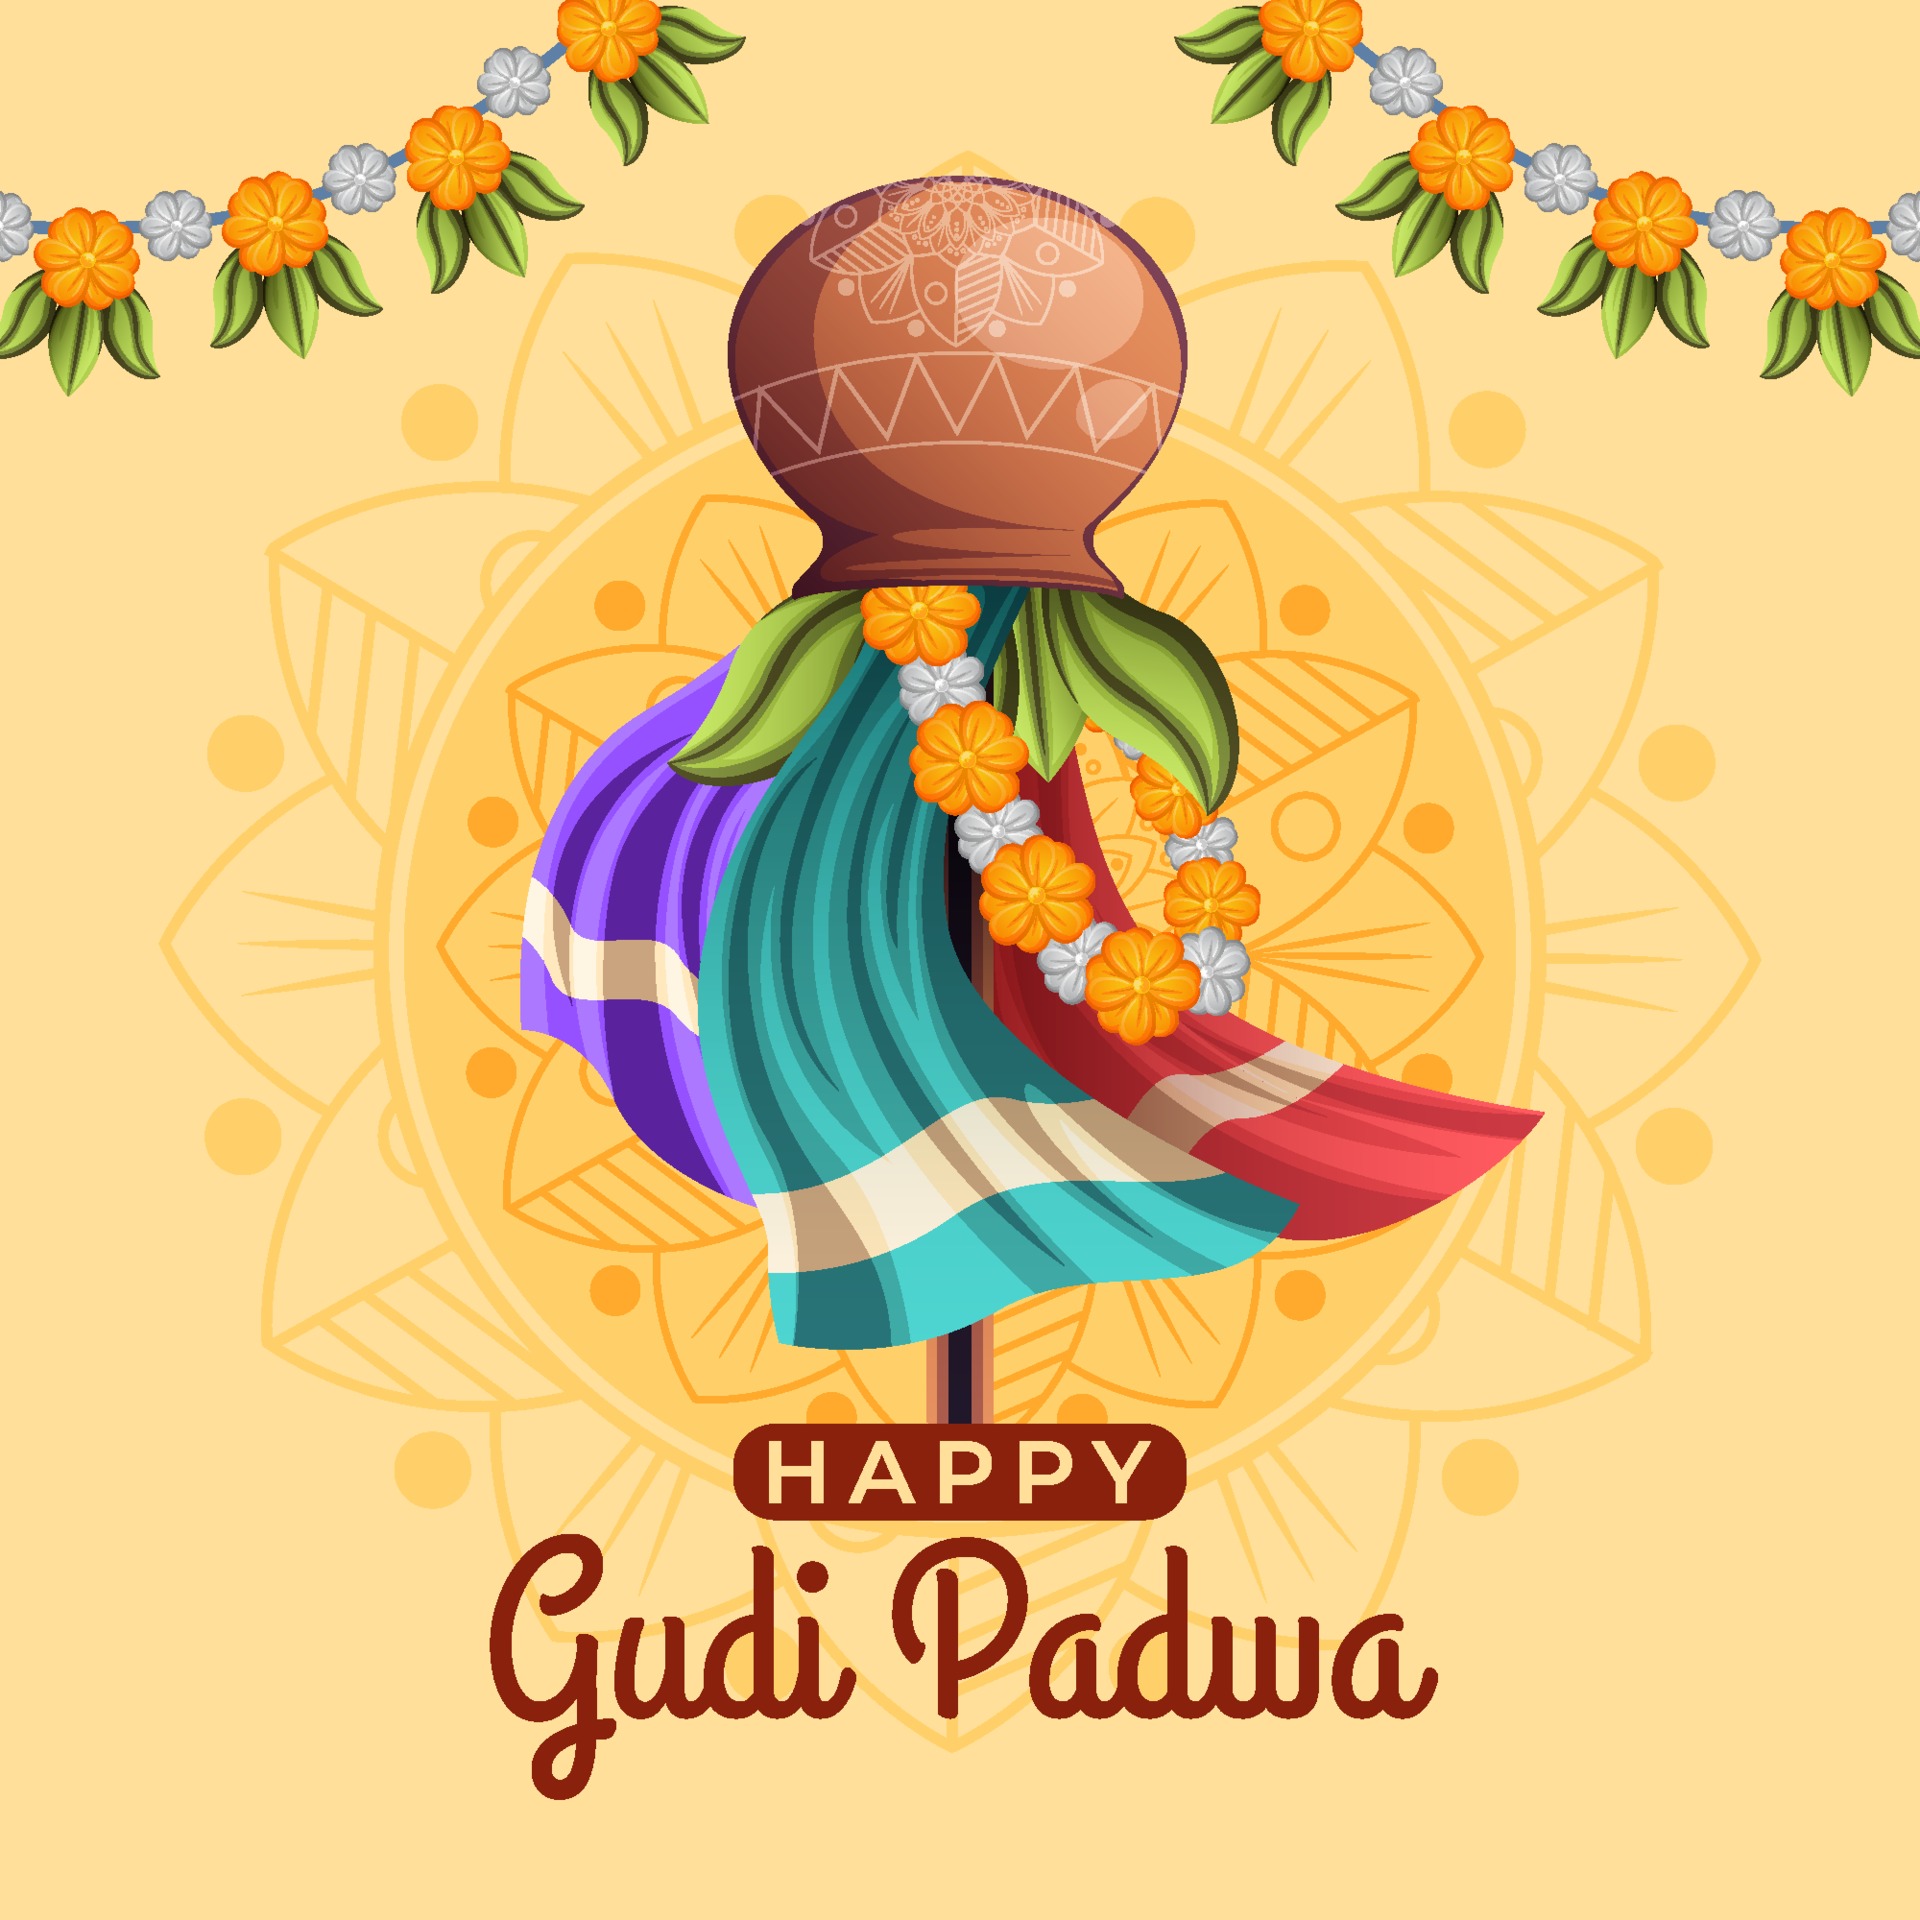 This Gudi Padwa may a new wave of prosperity and happiness bless your home  and family GudiPadwa  Happy gudi padwa images Gudi padwa Gudi padwa  rangoli